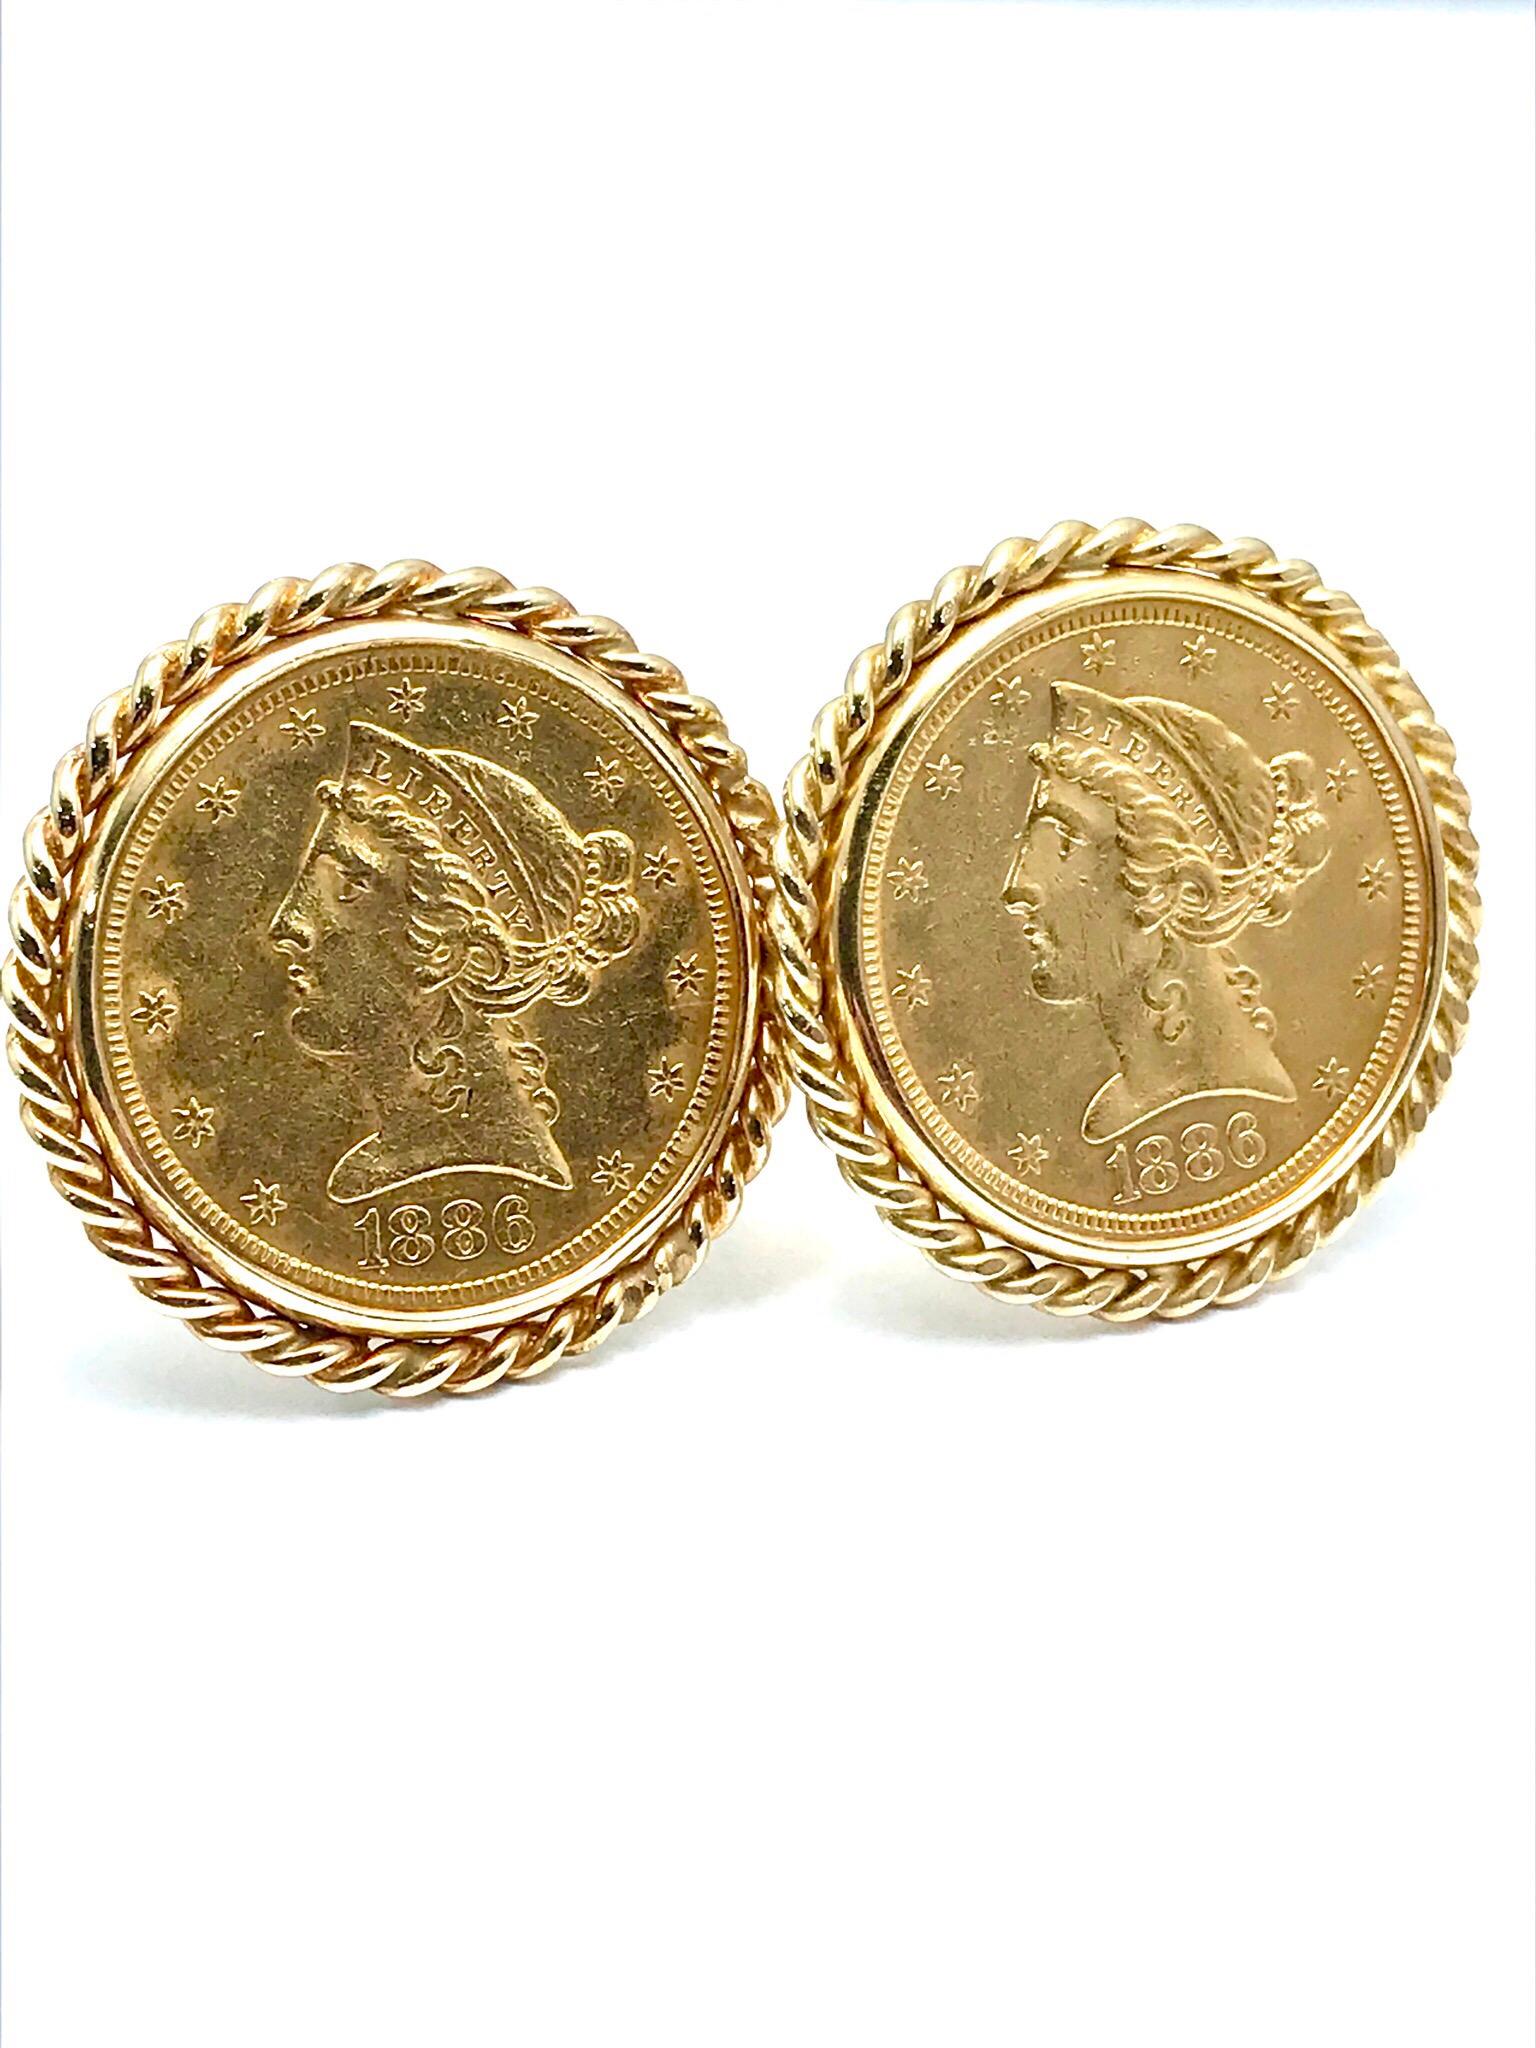 A classic pair of 1886 United States five dollar gold coin cufflinks.  Minted in the US, the coins 0.999 pure gold, set in 14 karat gold frames with a rope edge.  These cufflinks are a timeless set to add to anyone's collection.  The cufflinks